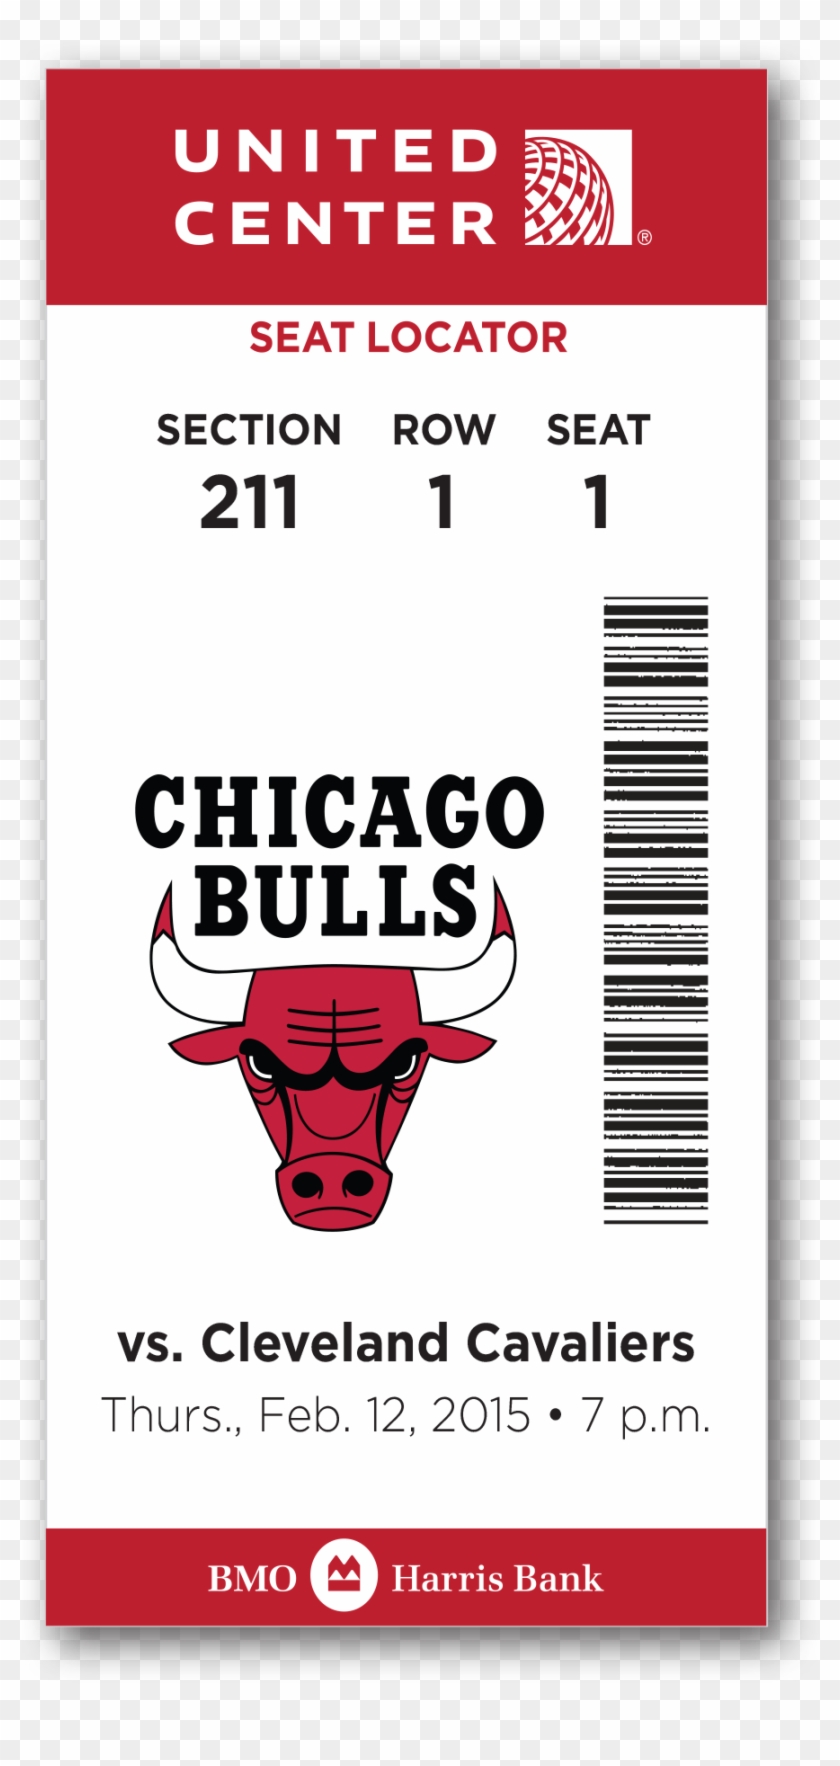 Tickets To Bulls Game - Chicago Bulls Ticket Clipart #3619366